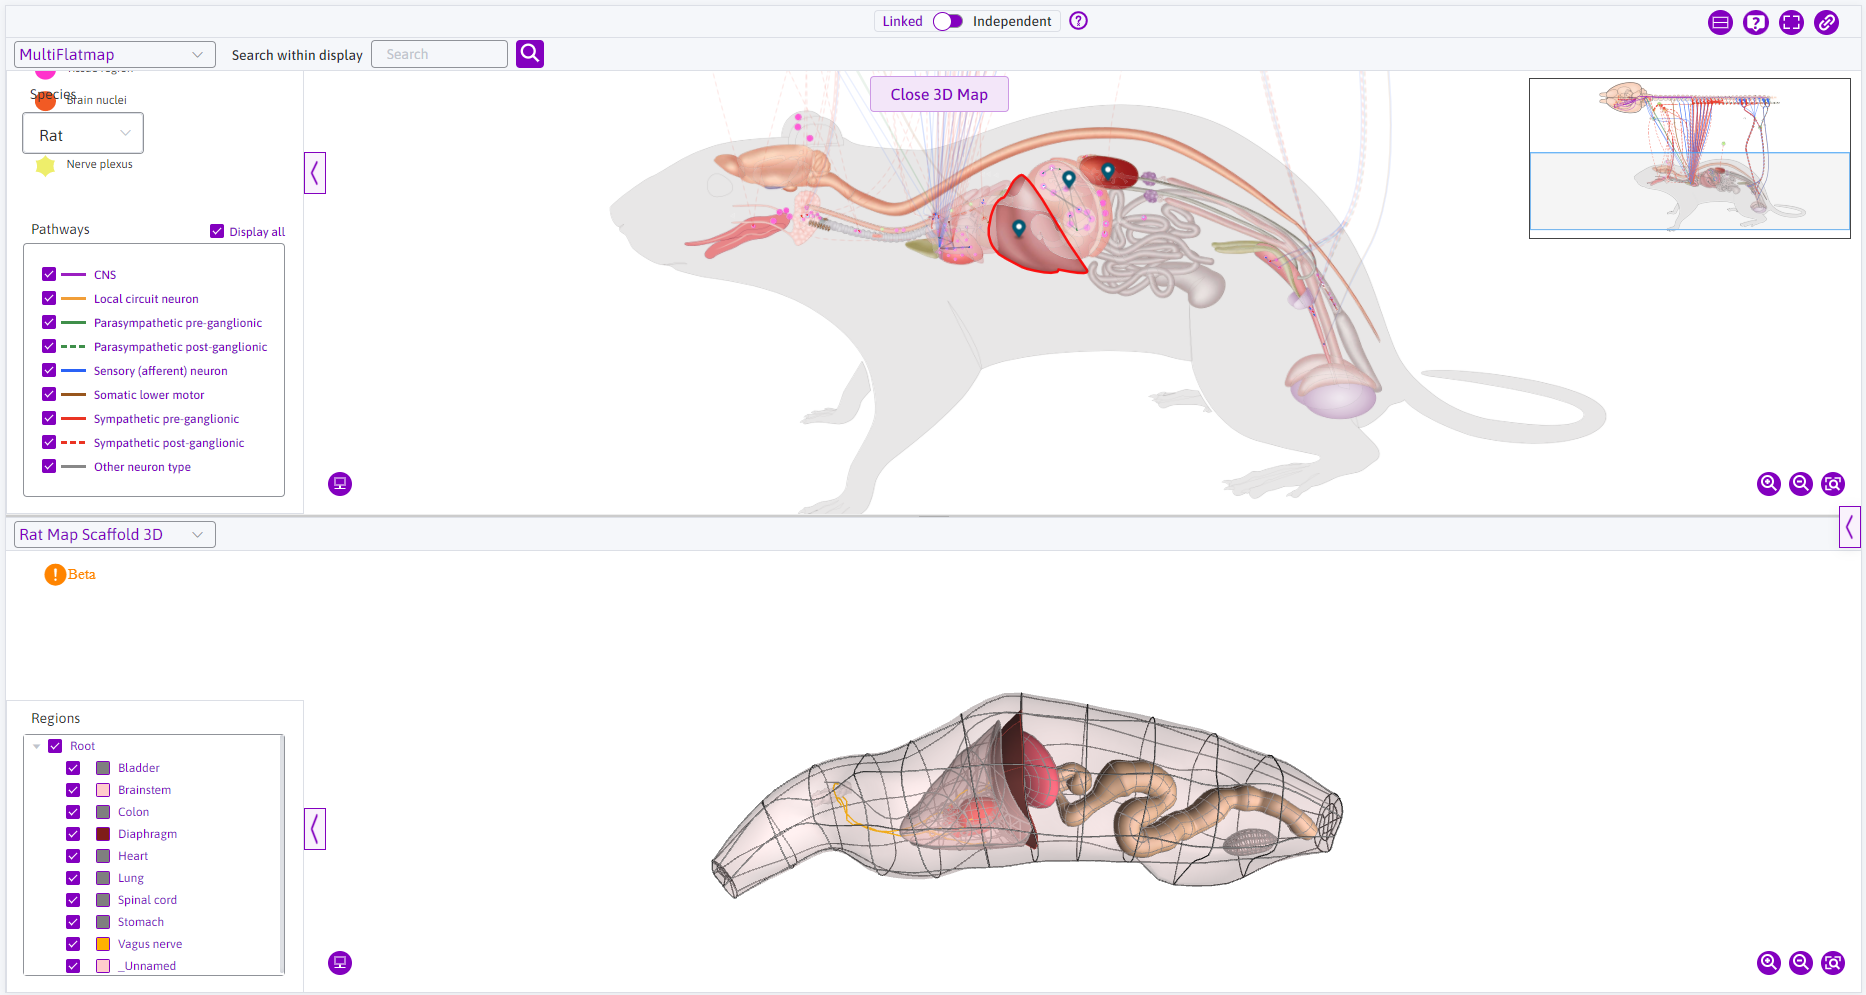 Figure 3: The multi-flatmap view with the 3D rat map displayed below.